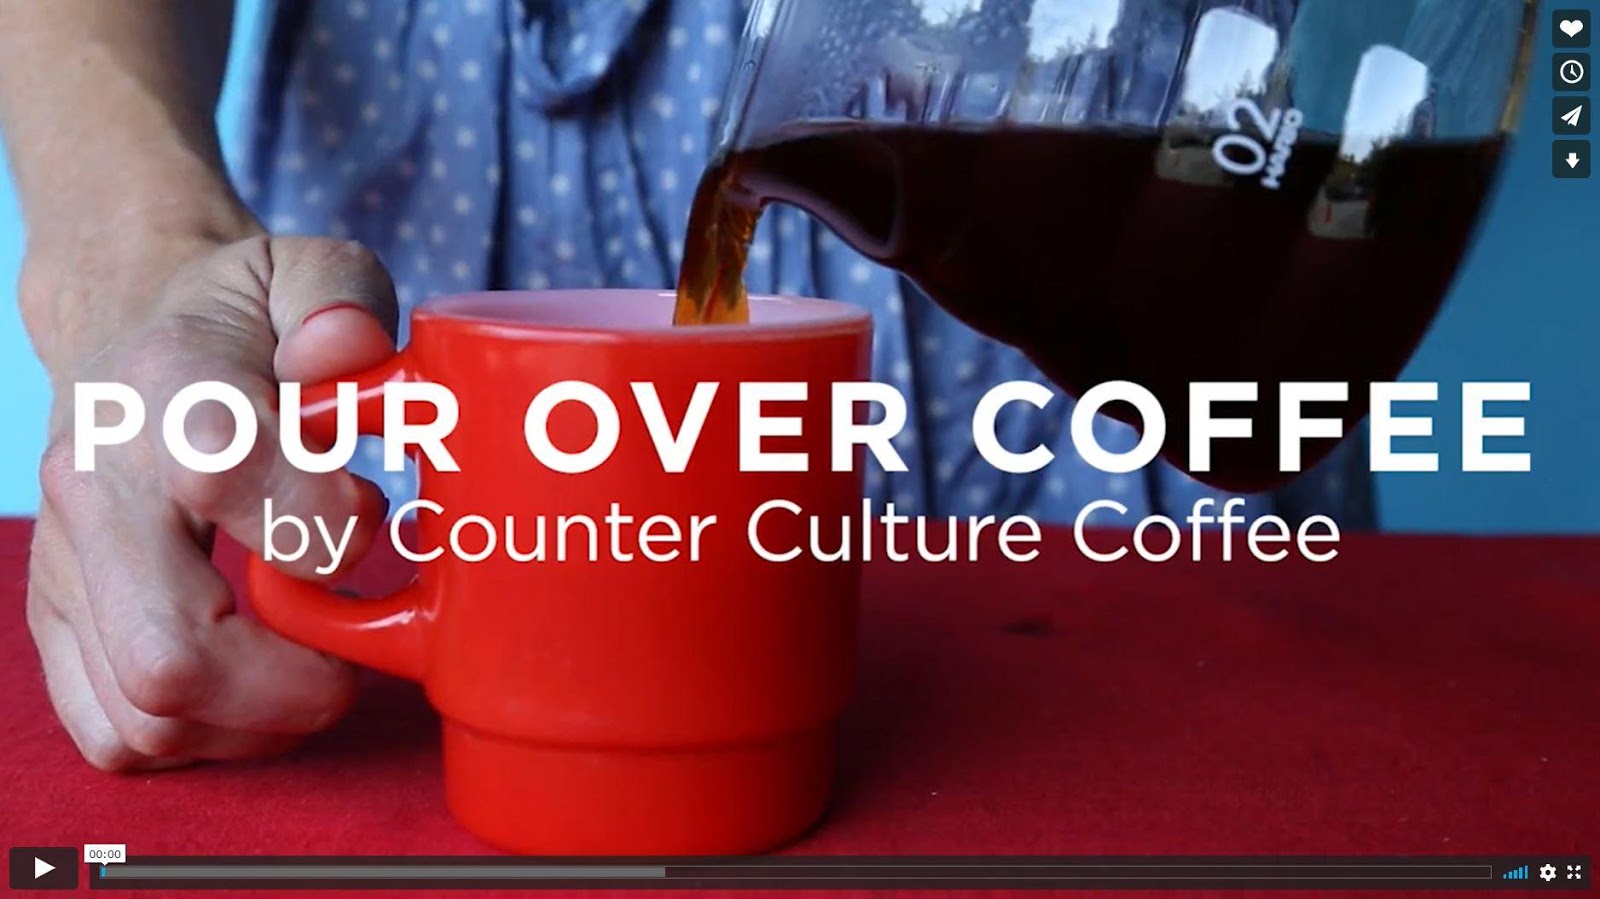 Counter Culture Coffee offers excellent free online guides